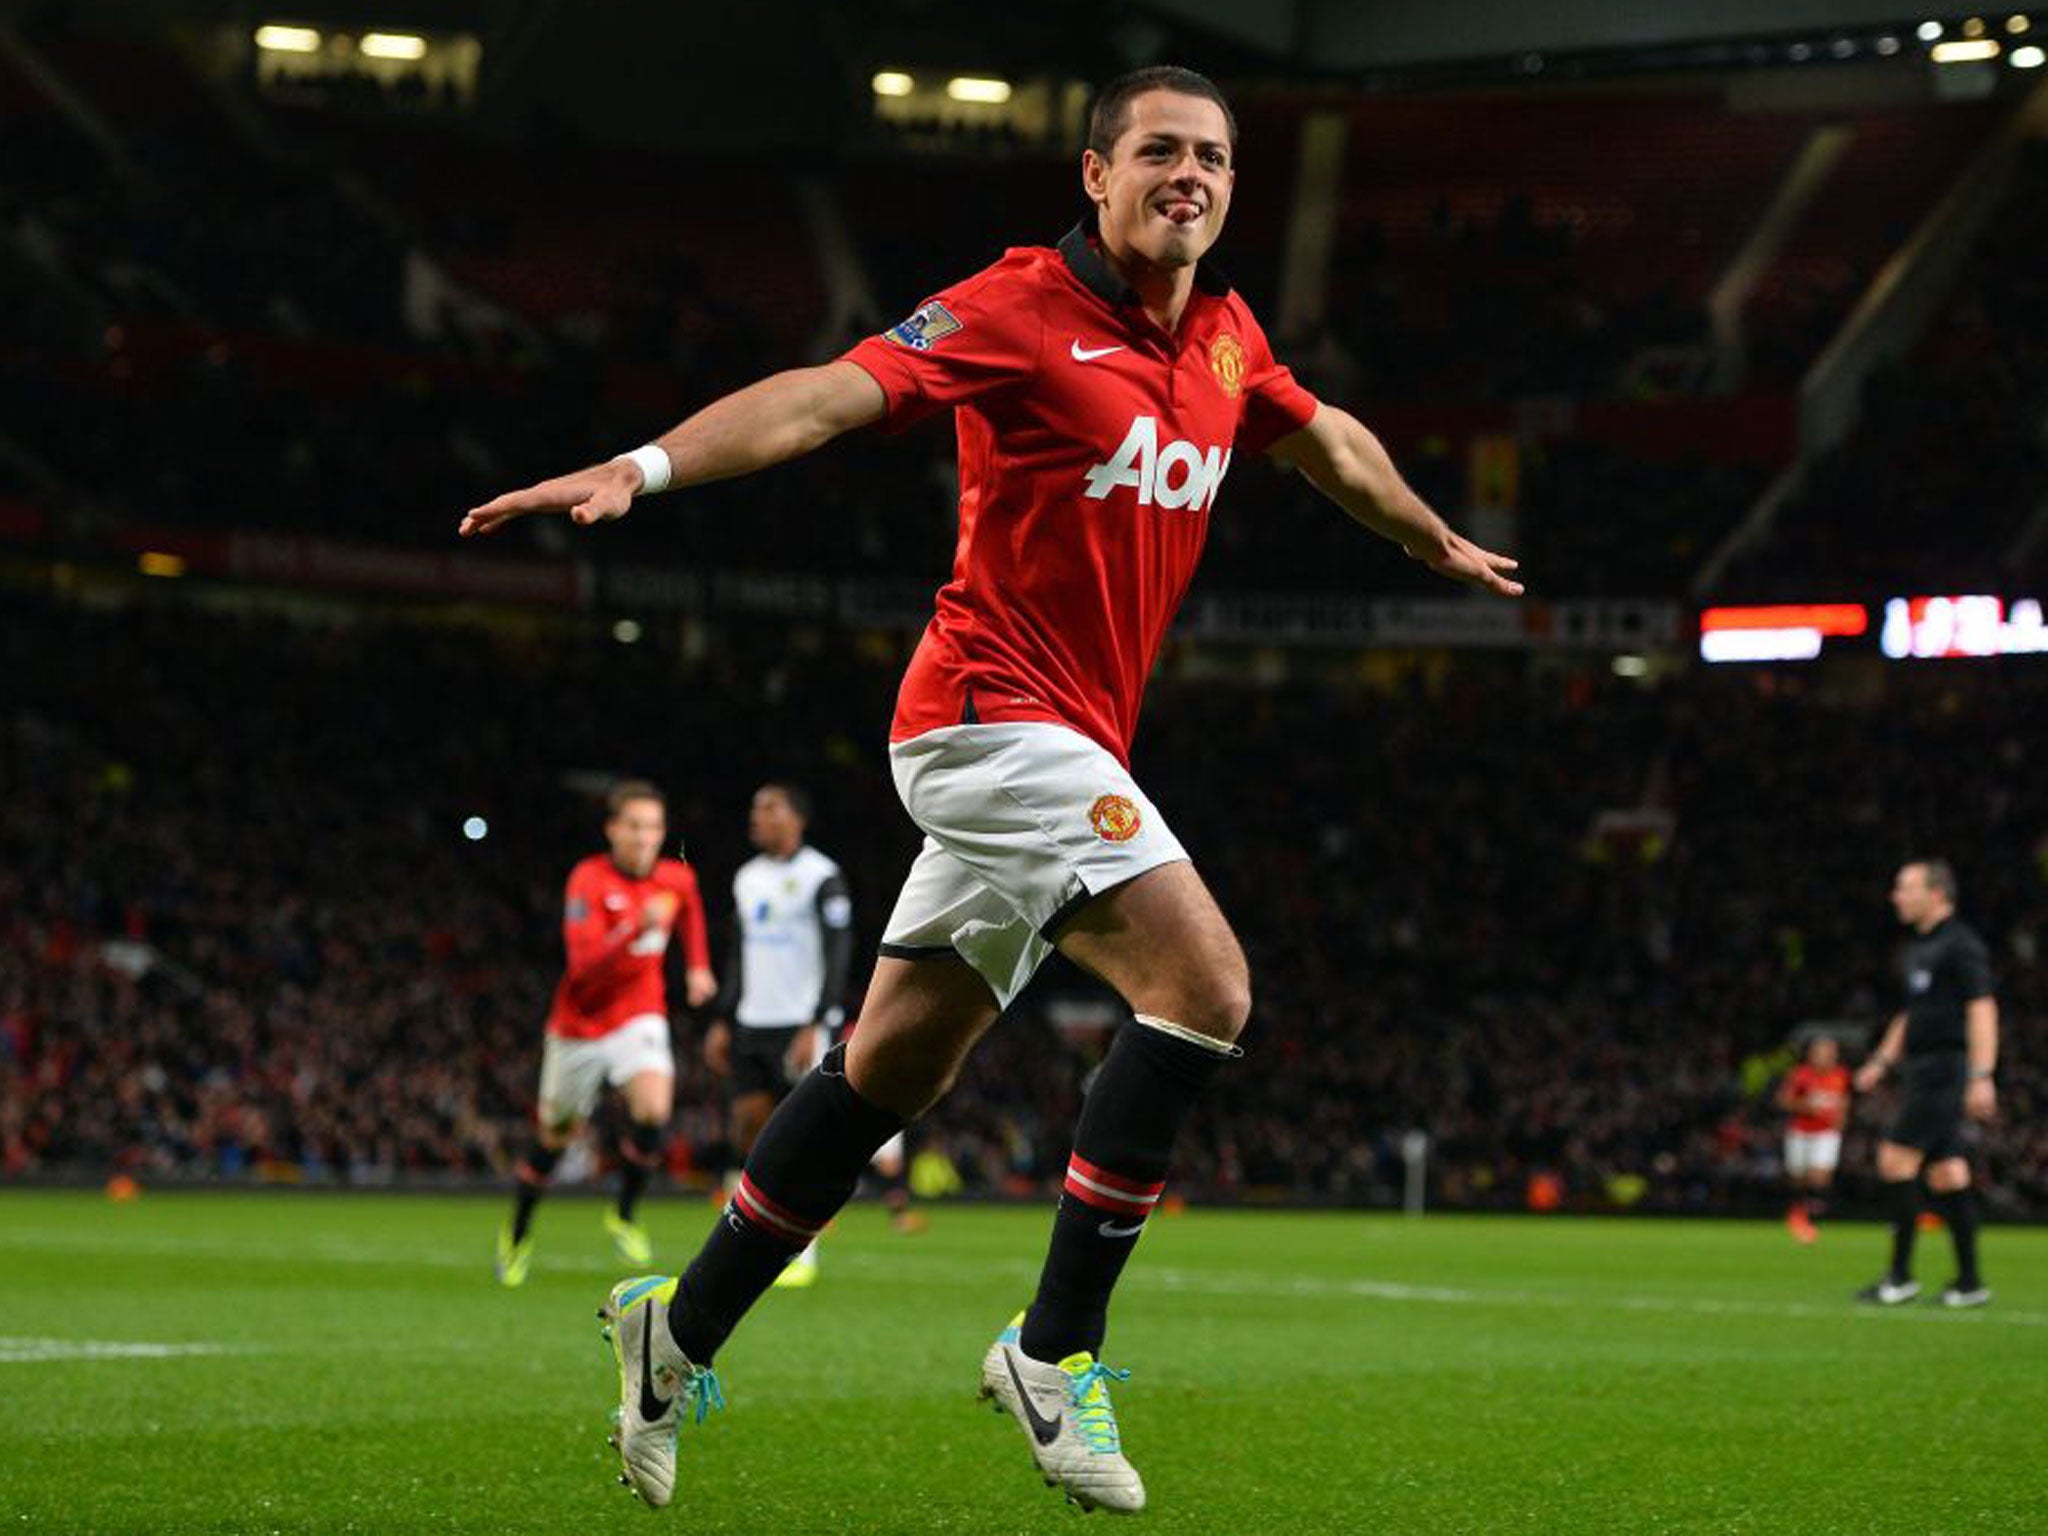 Javier Hernandez celebrates scoring his second goal during the League Cup fourth round match between Manchester United and Norwich City